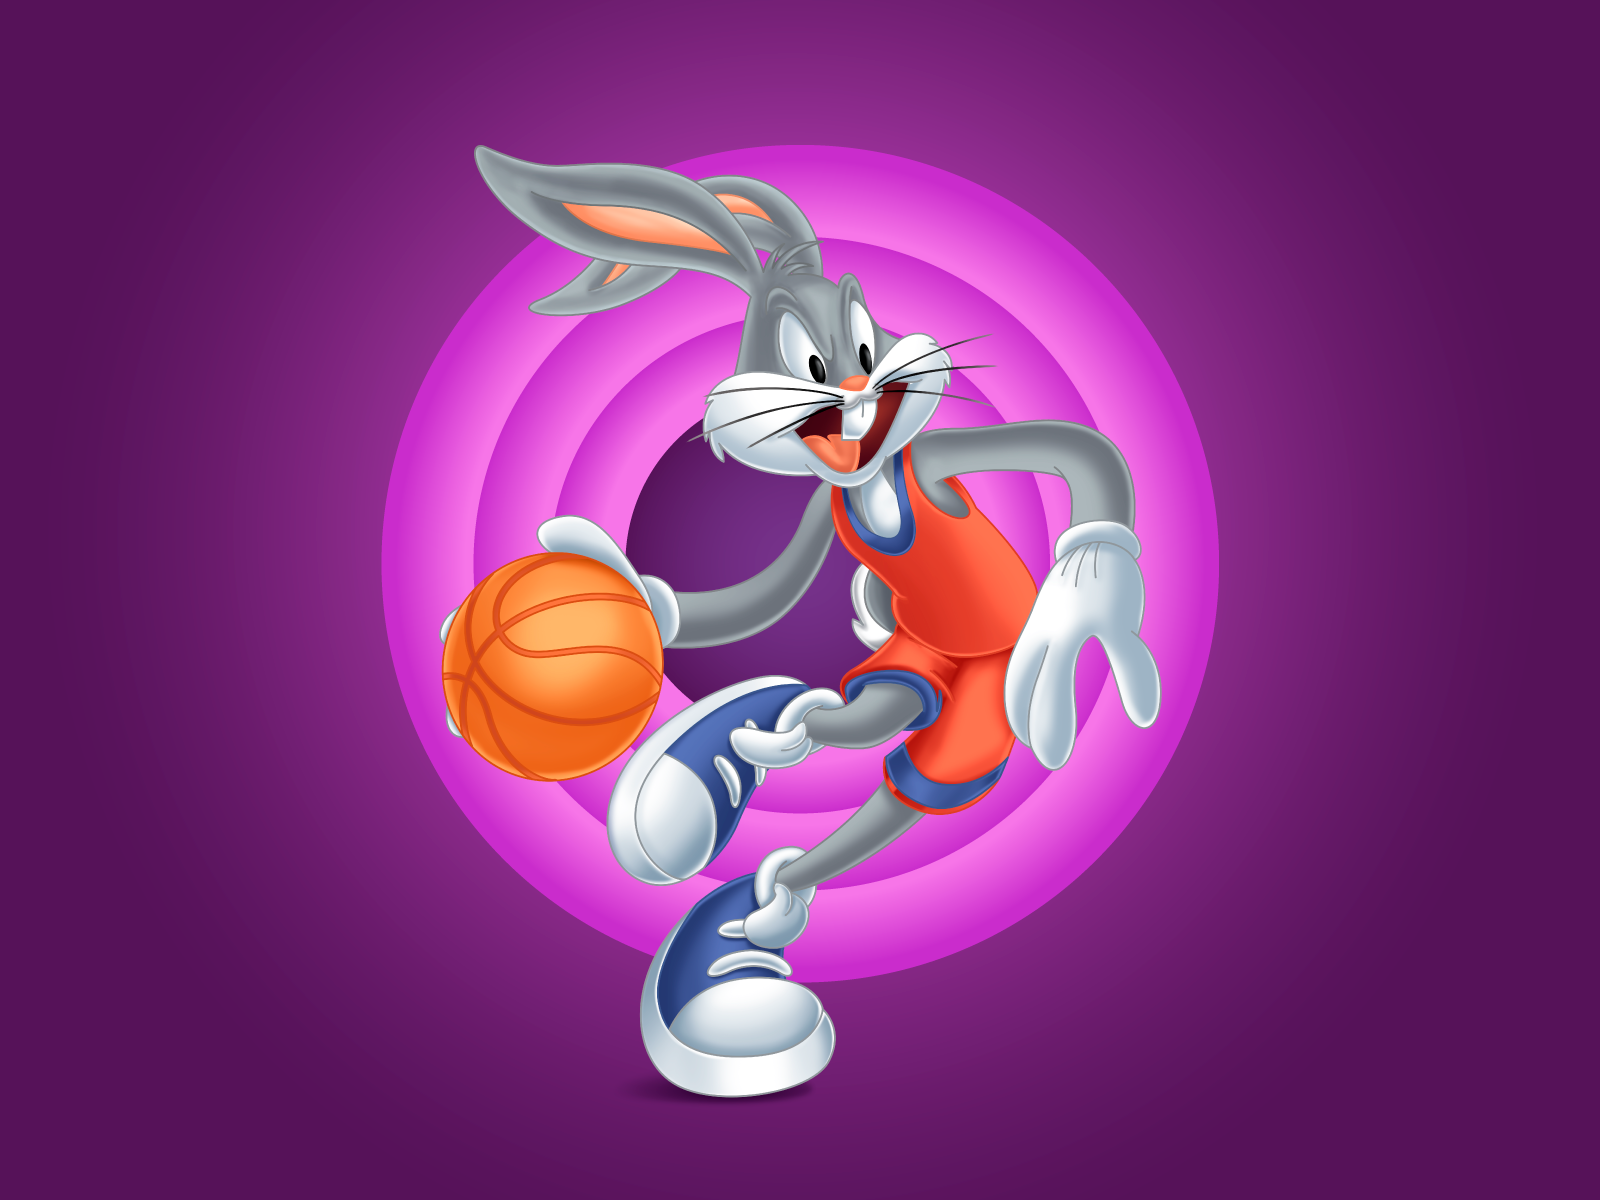 Bugs Bunny - Basketball player by Francois Llempen on Dribbble